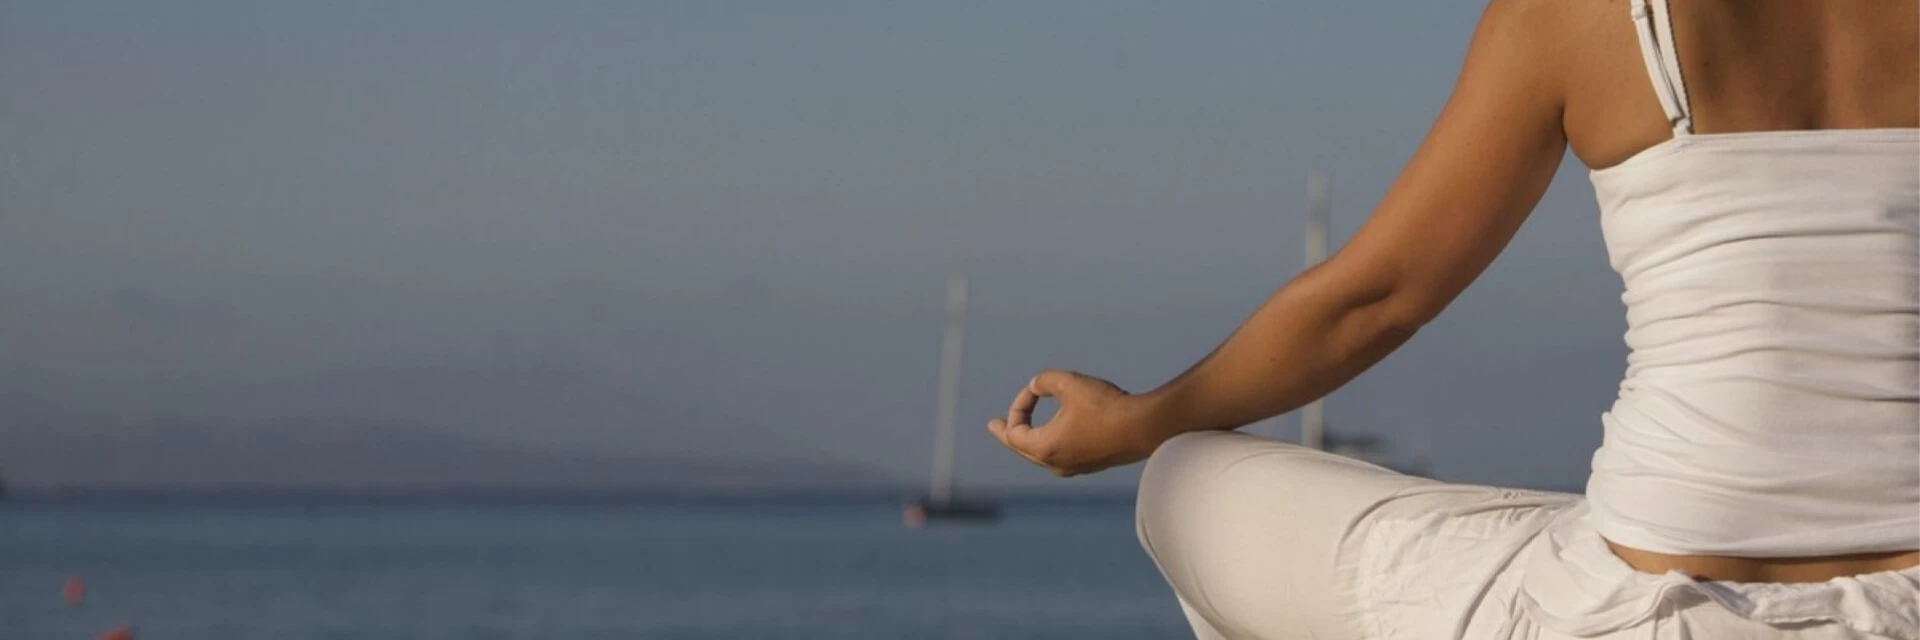 Ten meditation methods to clear your mind and create inner peace